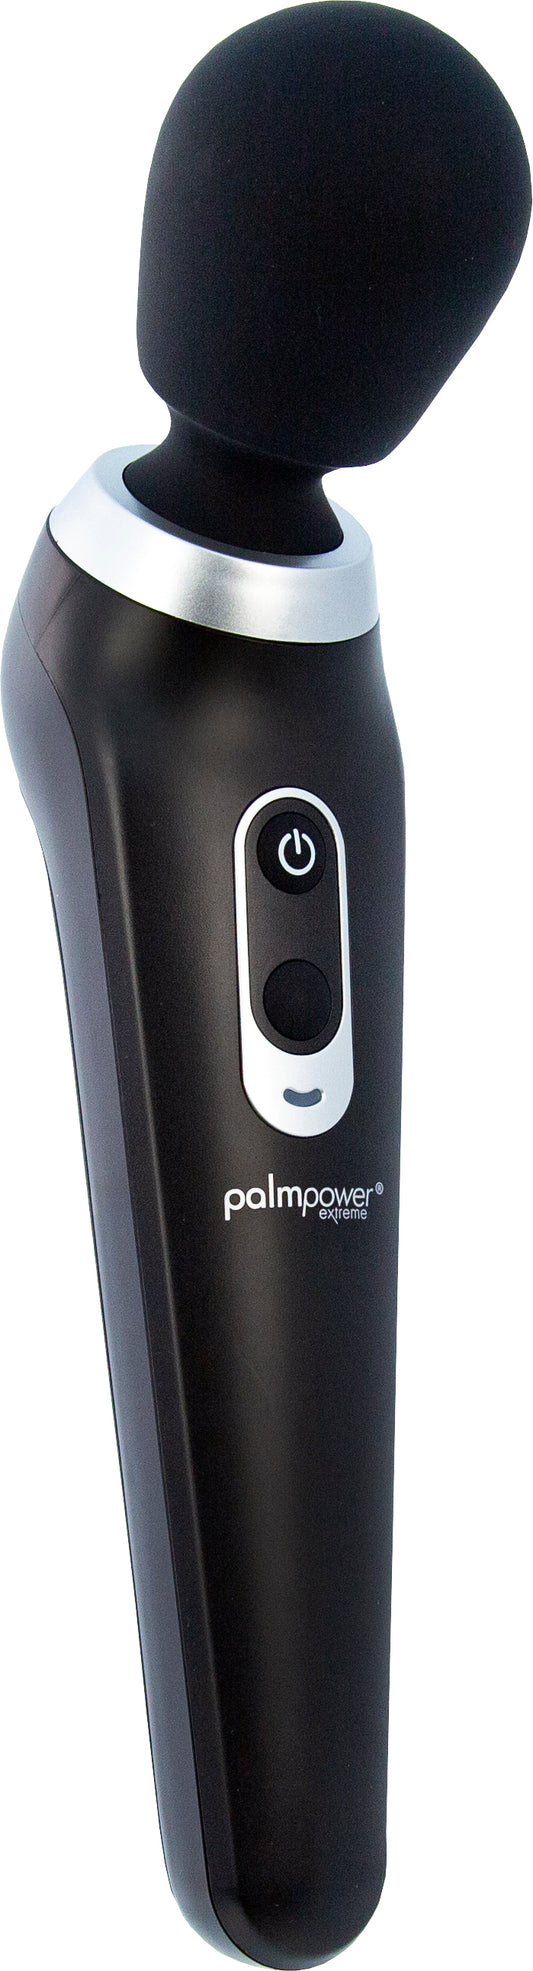 Palm Power Extreme Black - Just for you desires